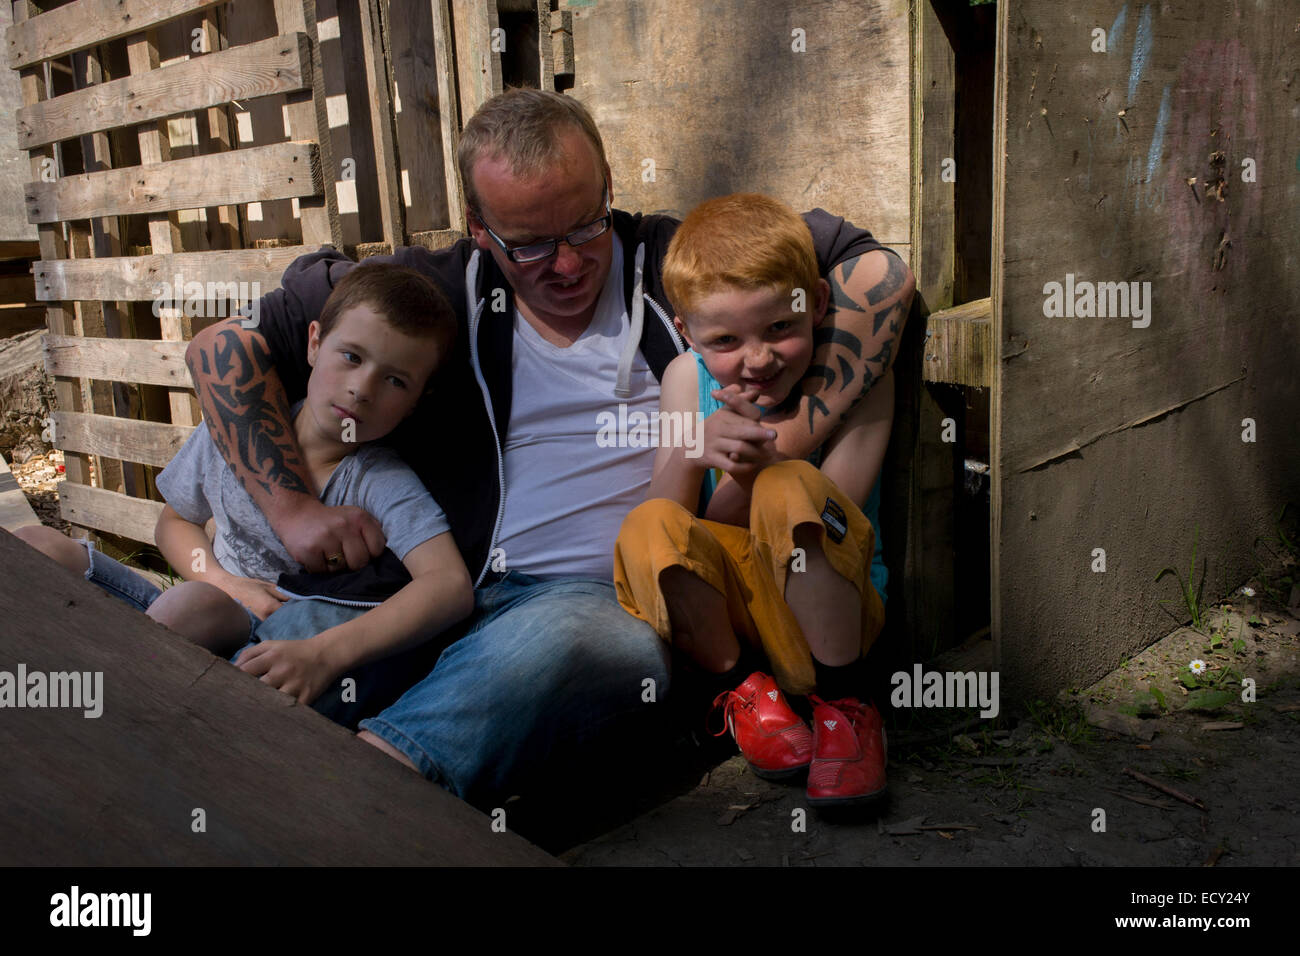 Father and boys in risk averse playground called The Land on Plas Madoc Estate, Ruabon, Wrexham, Wales. Stock Photo